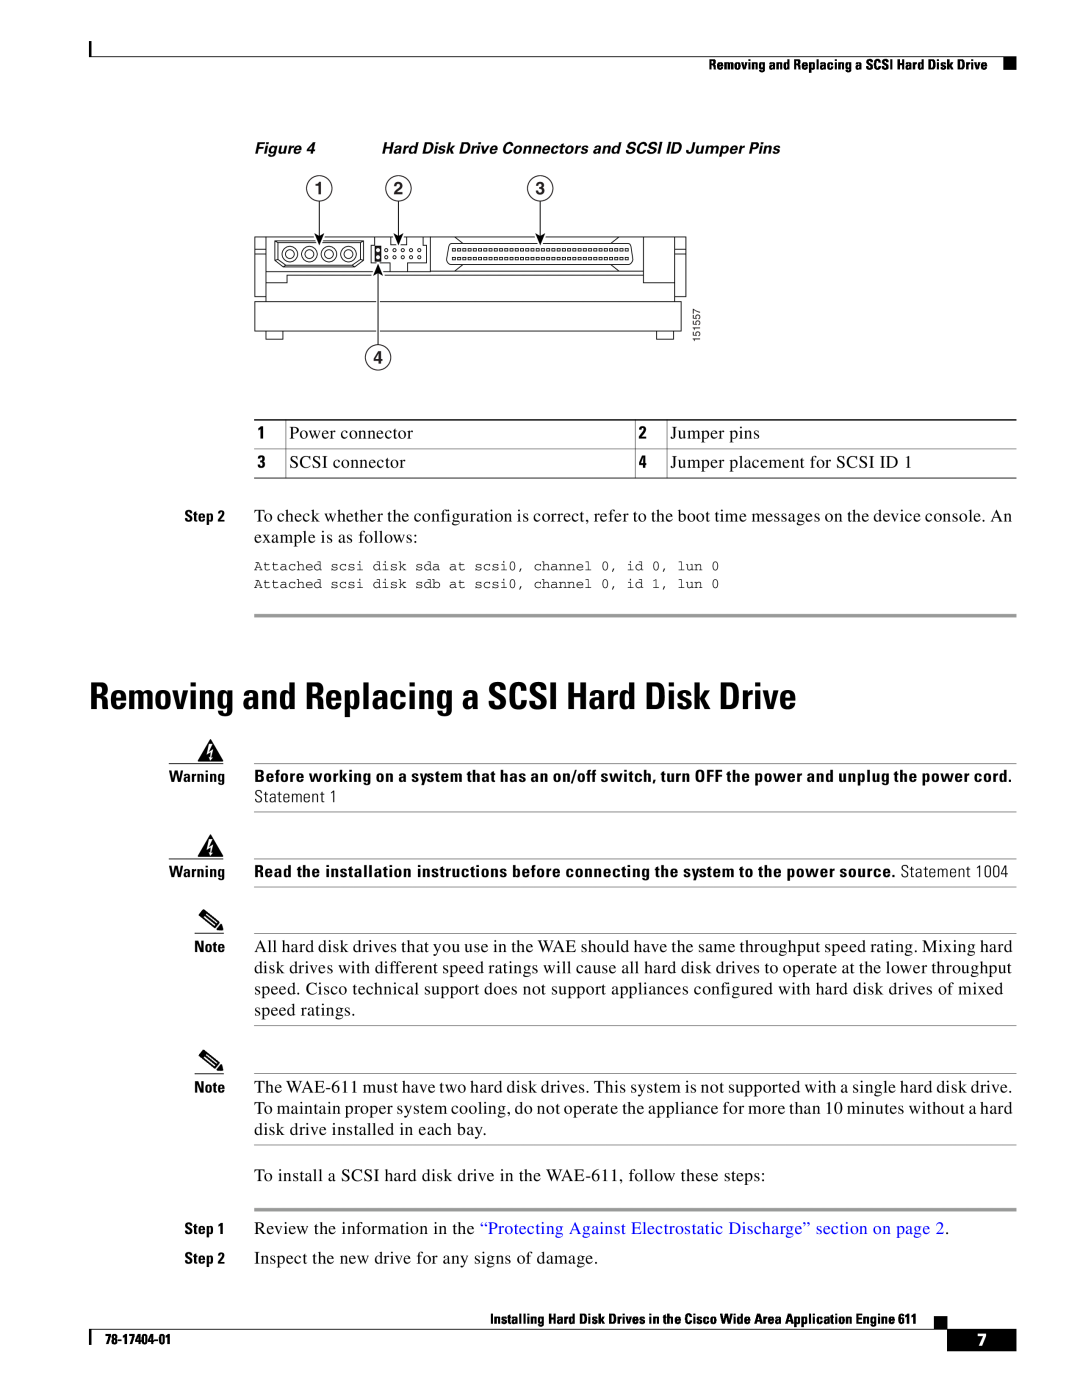 Cisco Systems Engine 611 manual Removing and Replacing a SCSI Hard Disk Drive 